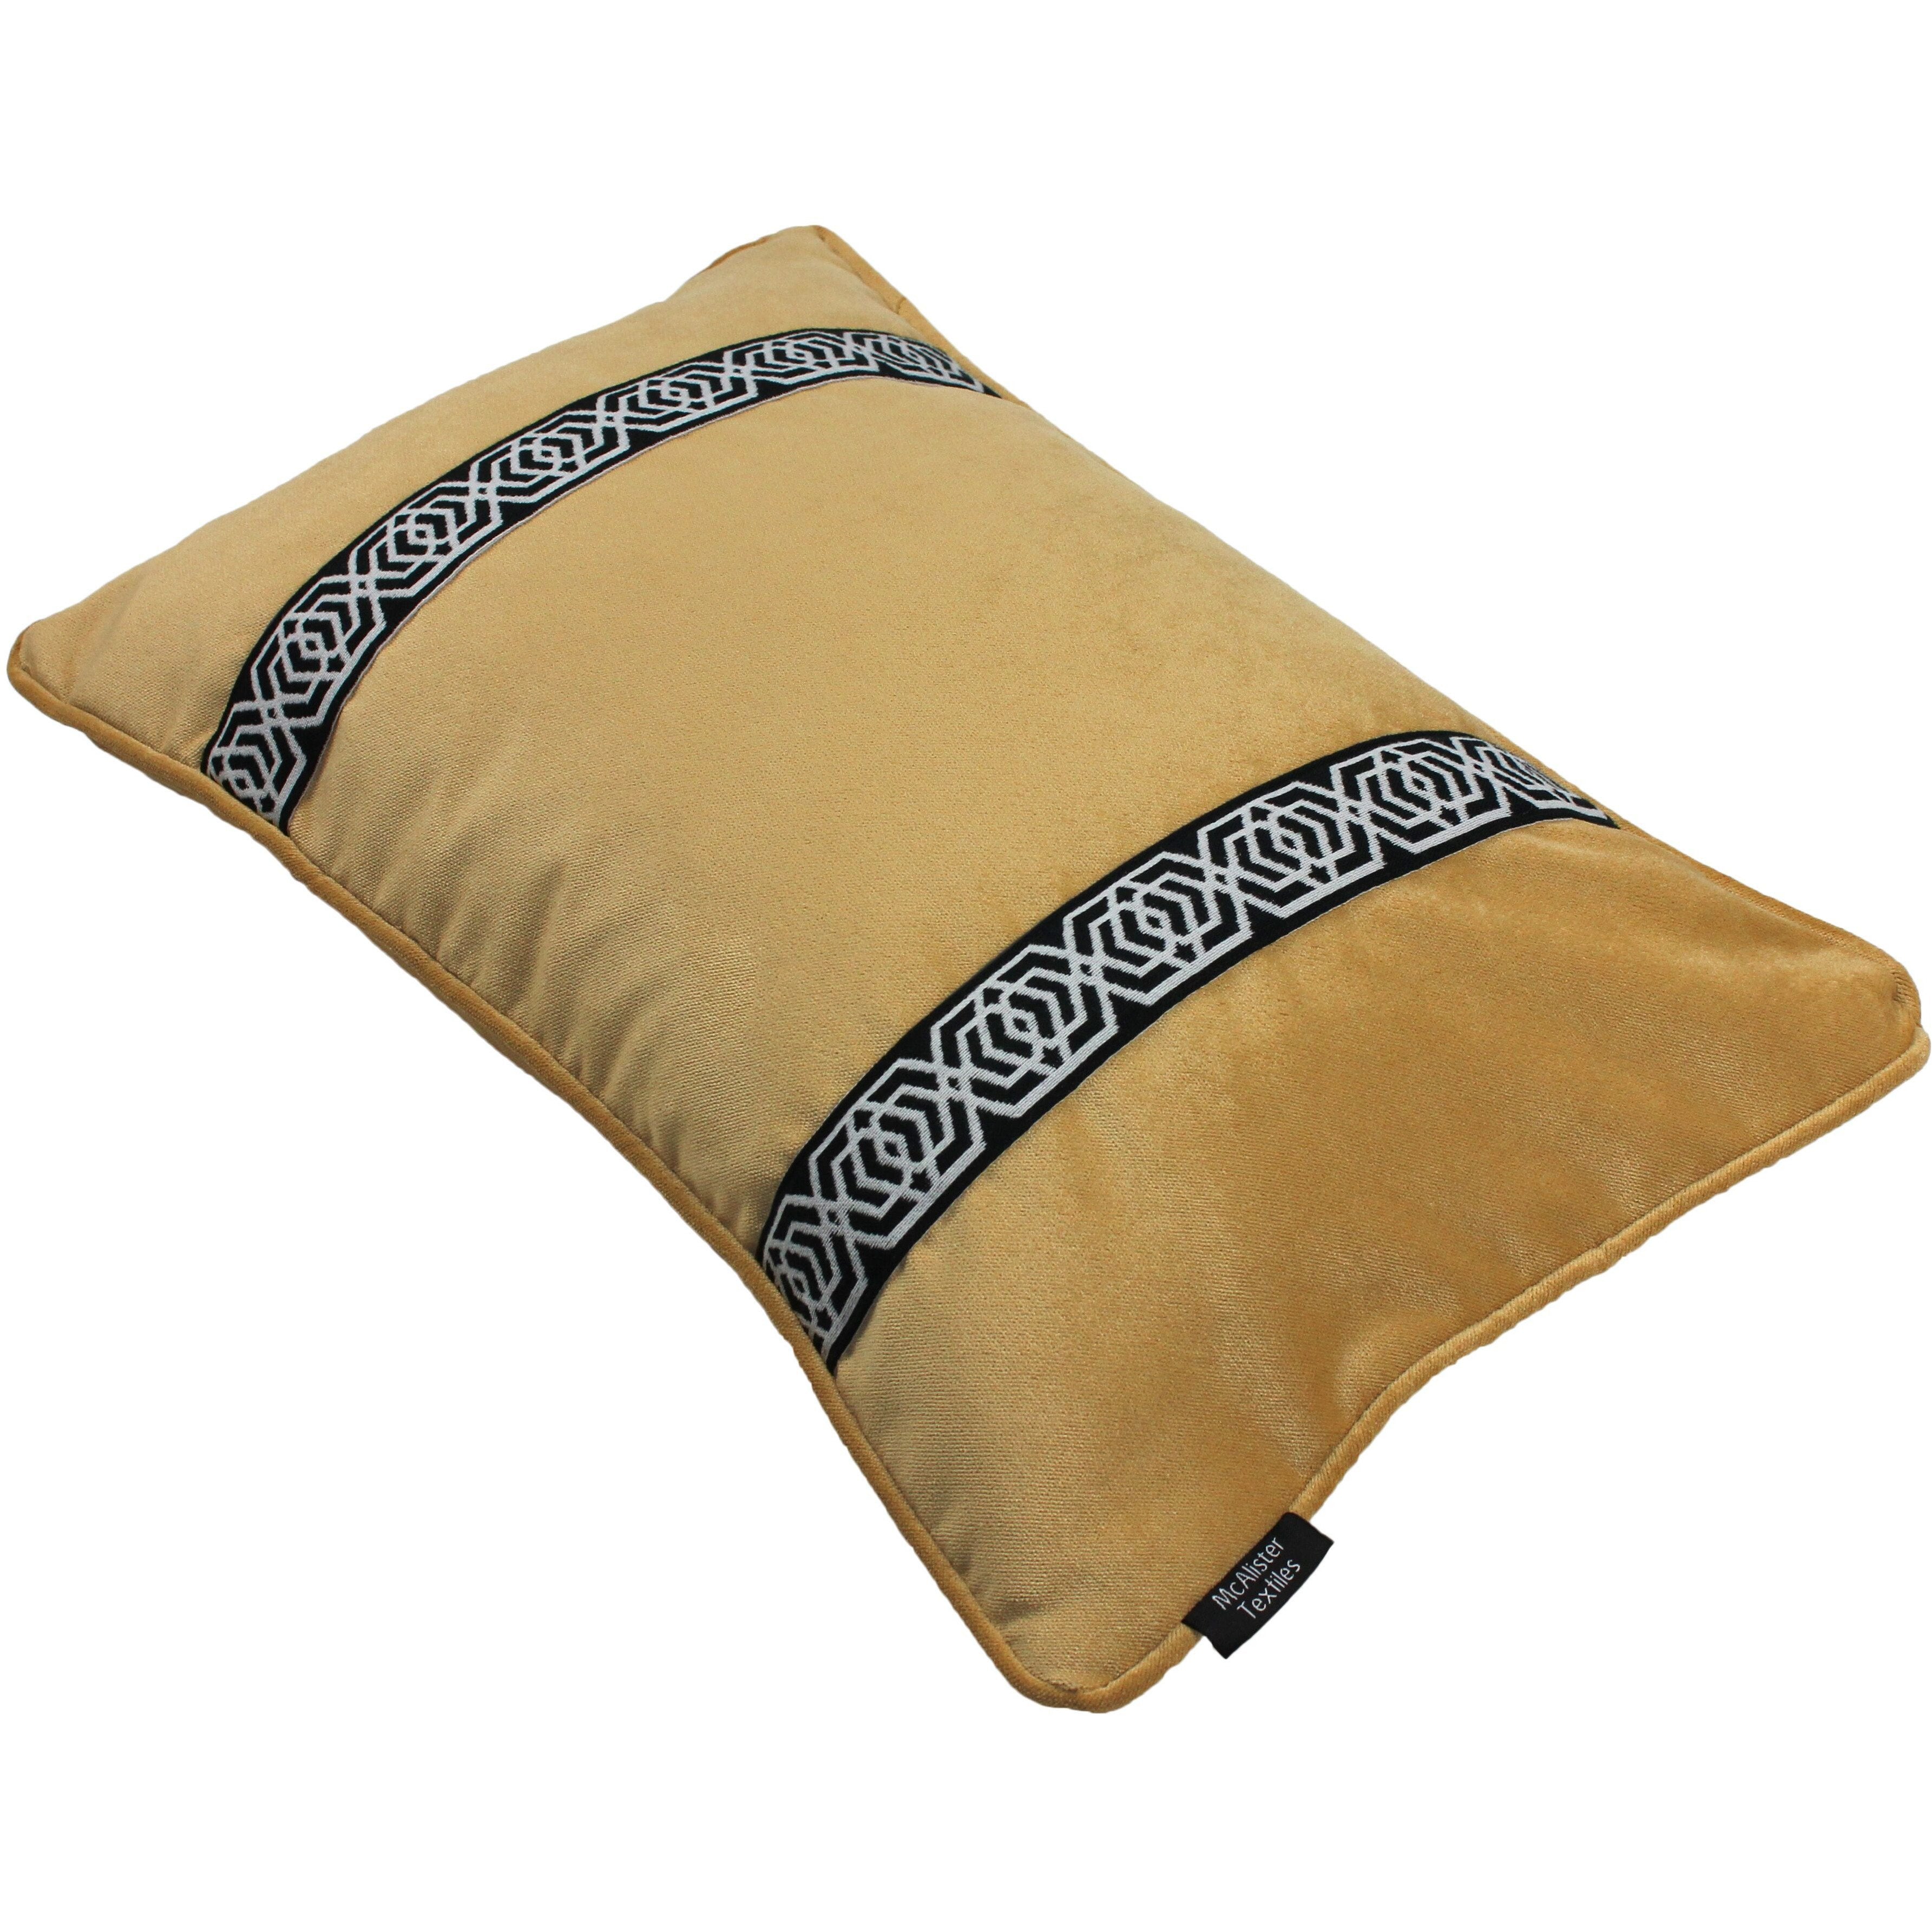 McAlister Textiles Coba Striped Ochre Yellow Velvet Cushion Cushions and Covers 